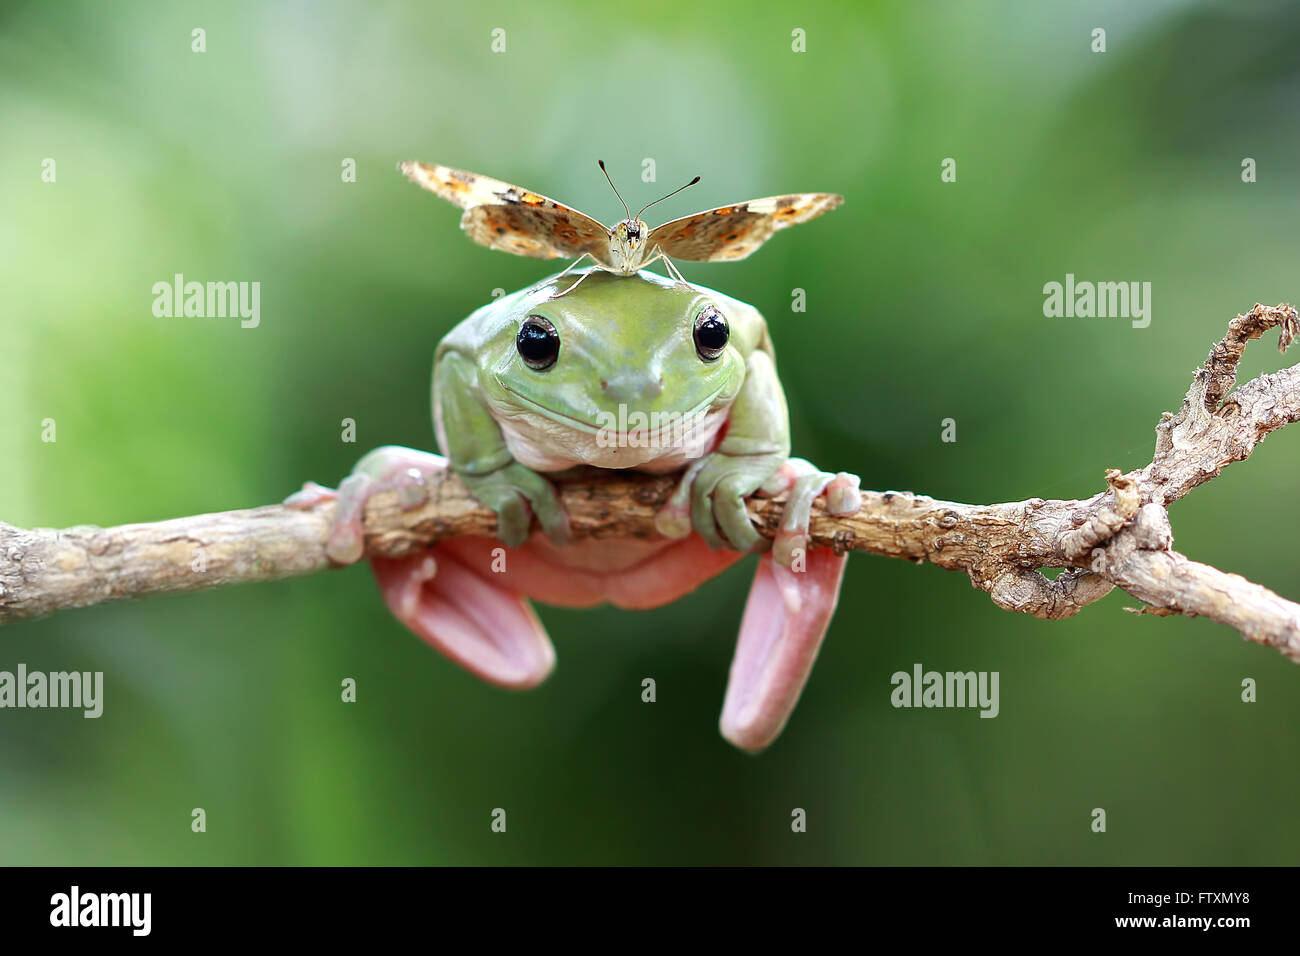 Butterfly sitting on dumpy tree frog, Indonesia Stock Photo